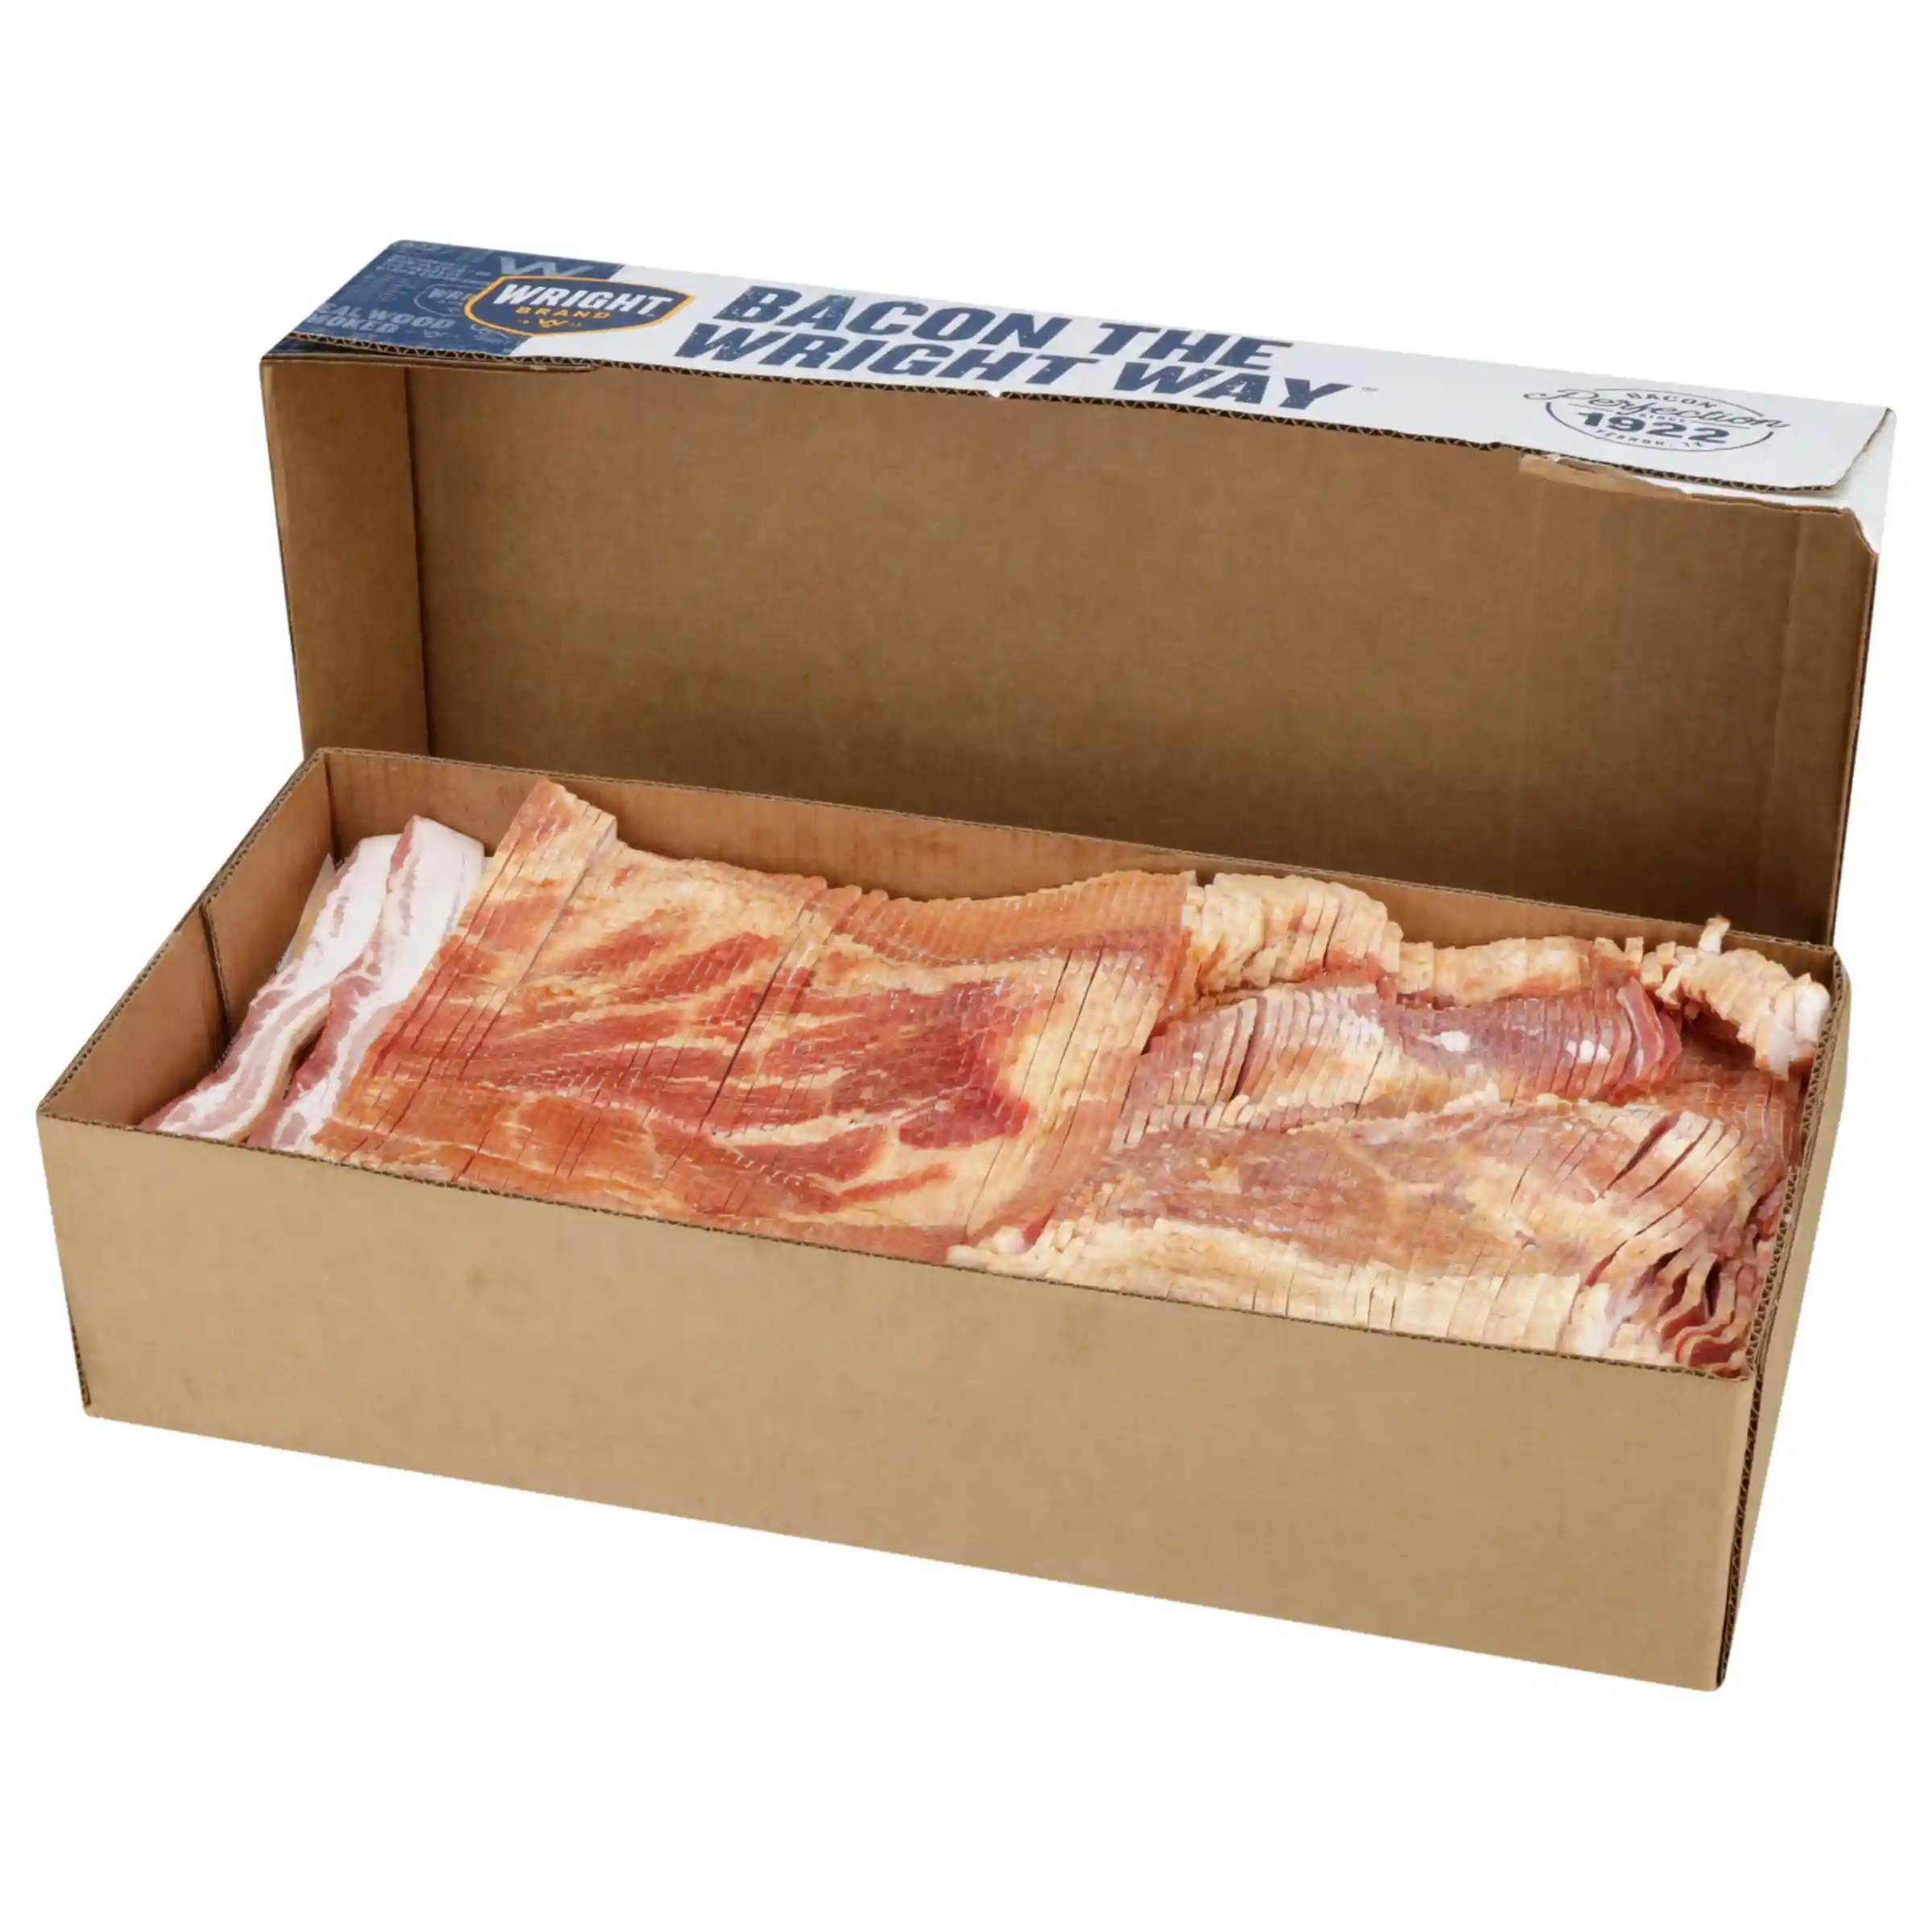 Wright® Brand Naturally Hickory Smoked Regular Sliced Bacon, Bulk, 33 Lbs, 6 Slices/Inch, Frozen_image_31